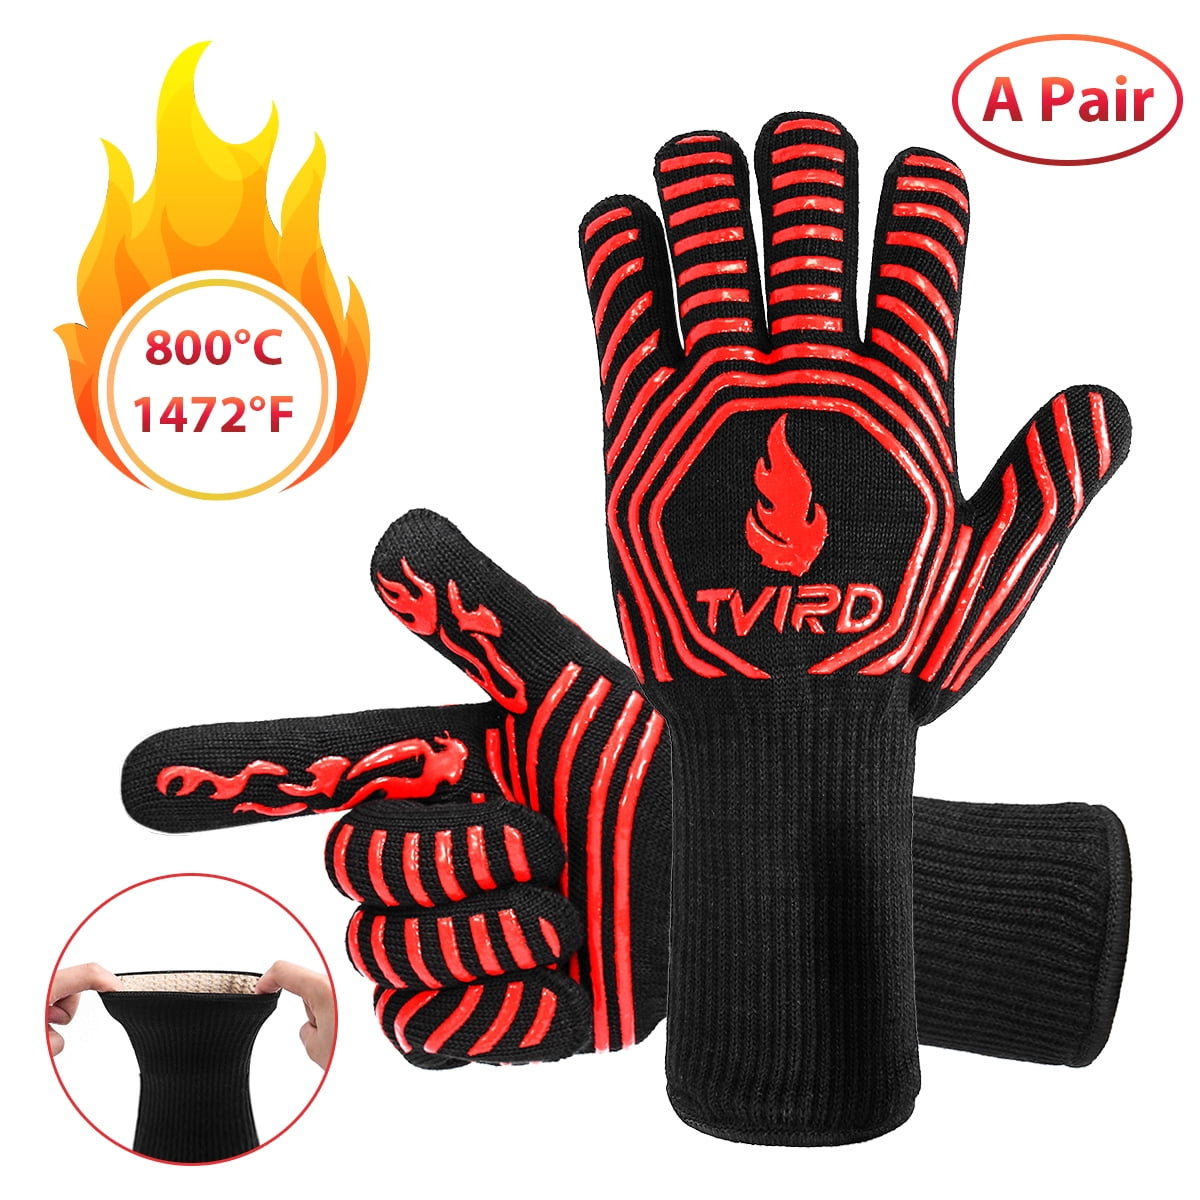 Grilling Use for Camping Add to your Grill Accessories -.Set of 2 Gloves Textured grip & soil resistant with soft cotton liner Artisan Griller Hand Armor Heat & Cut Resistant Gloves Firepits 